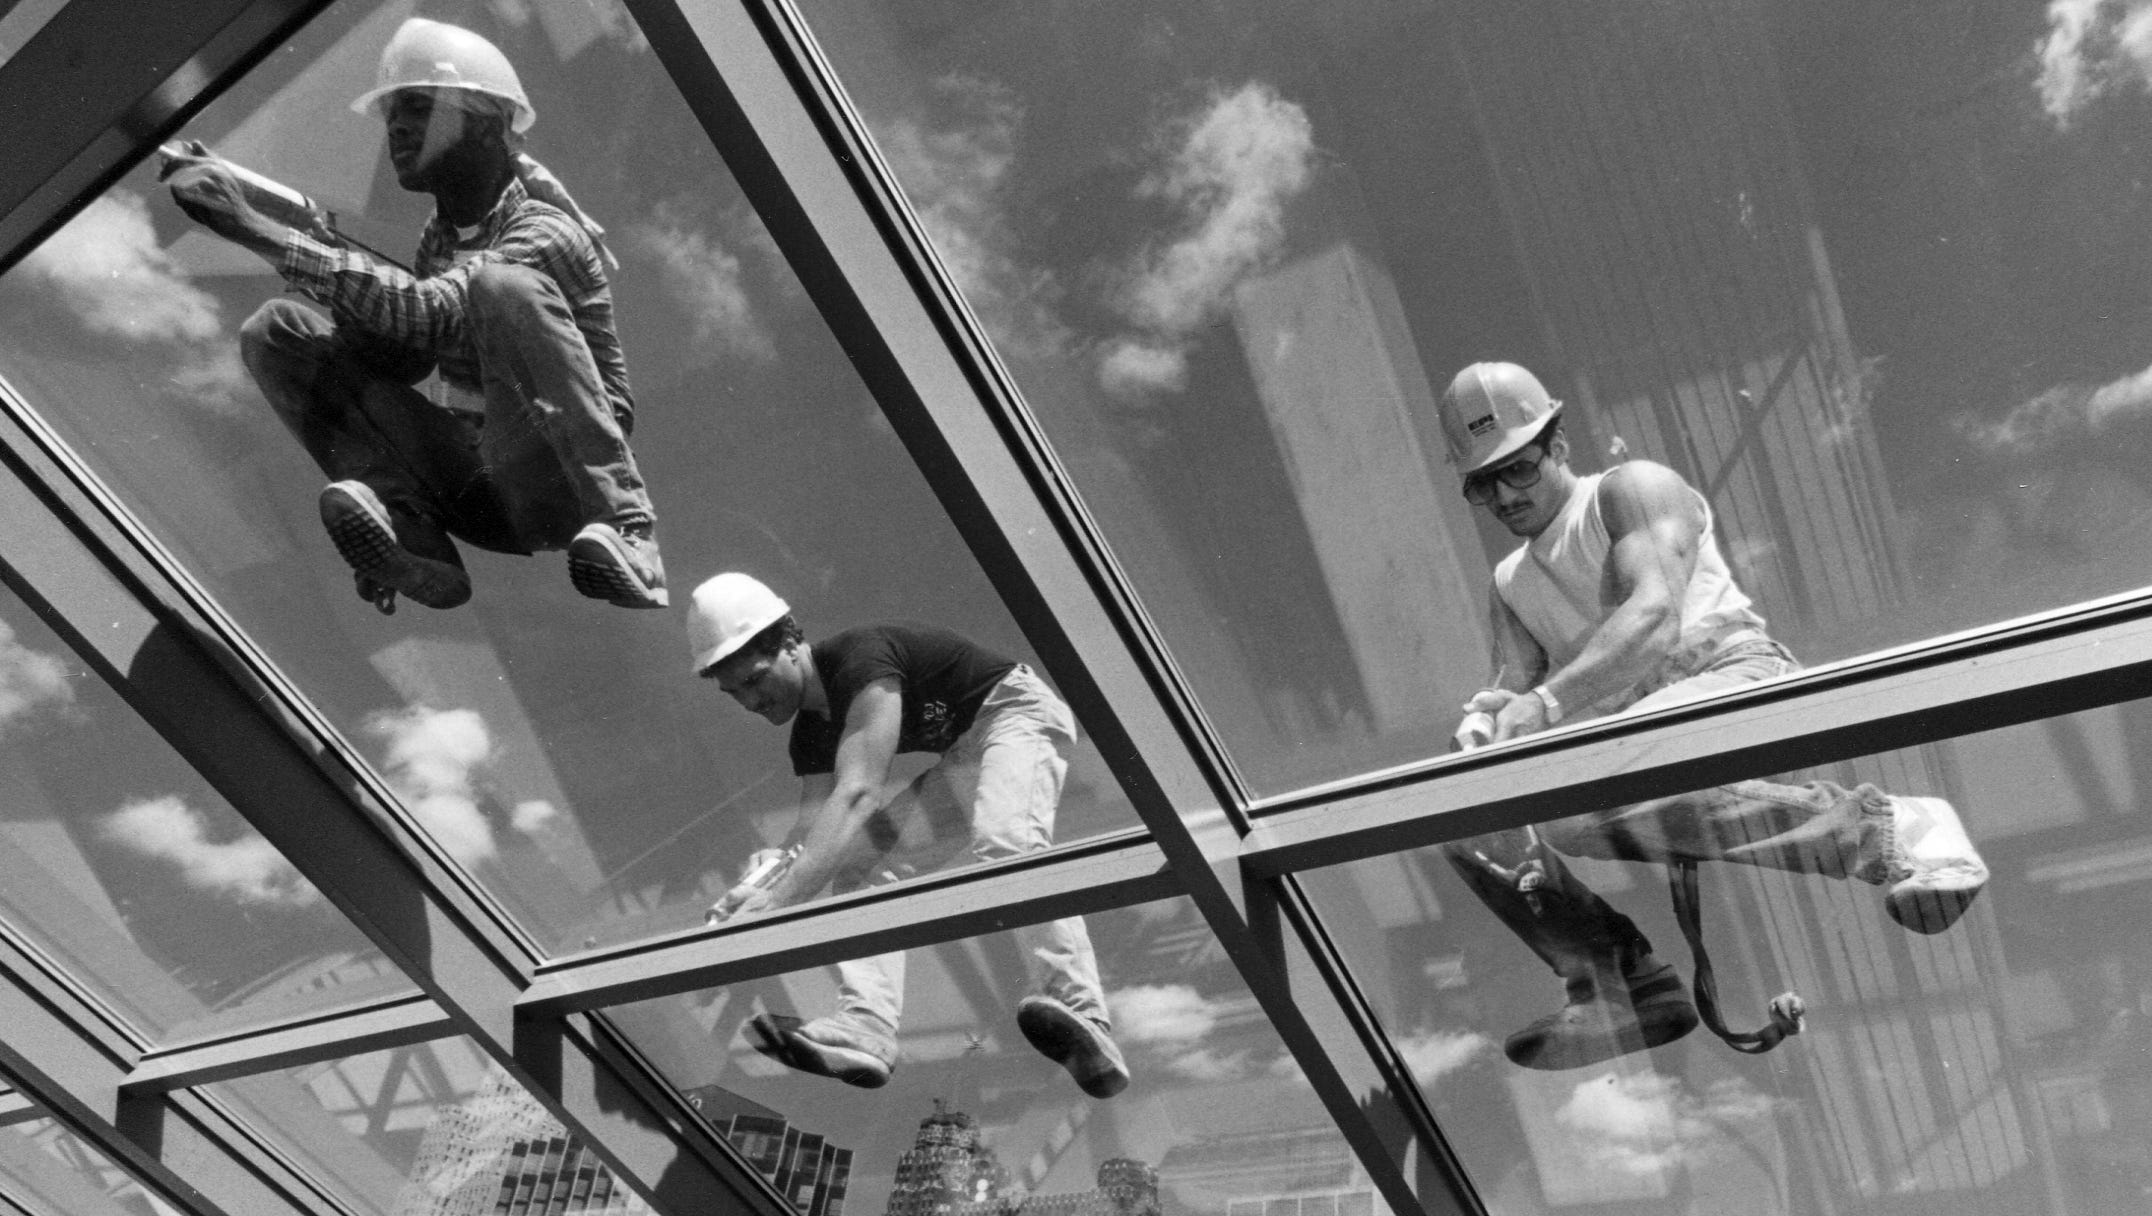 Construction workers complete the glass roof on Sept. 10, 1987.